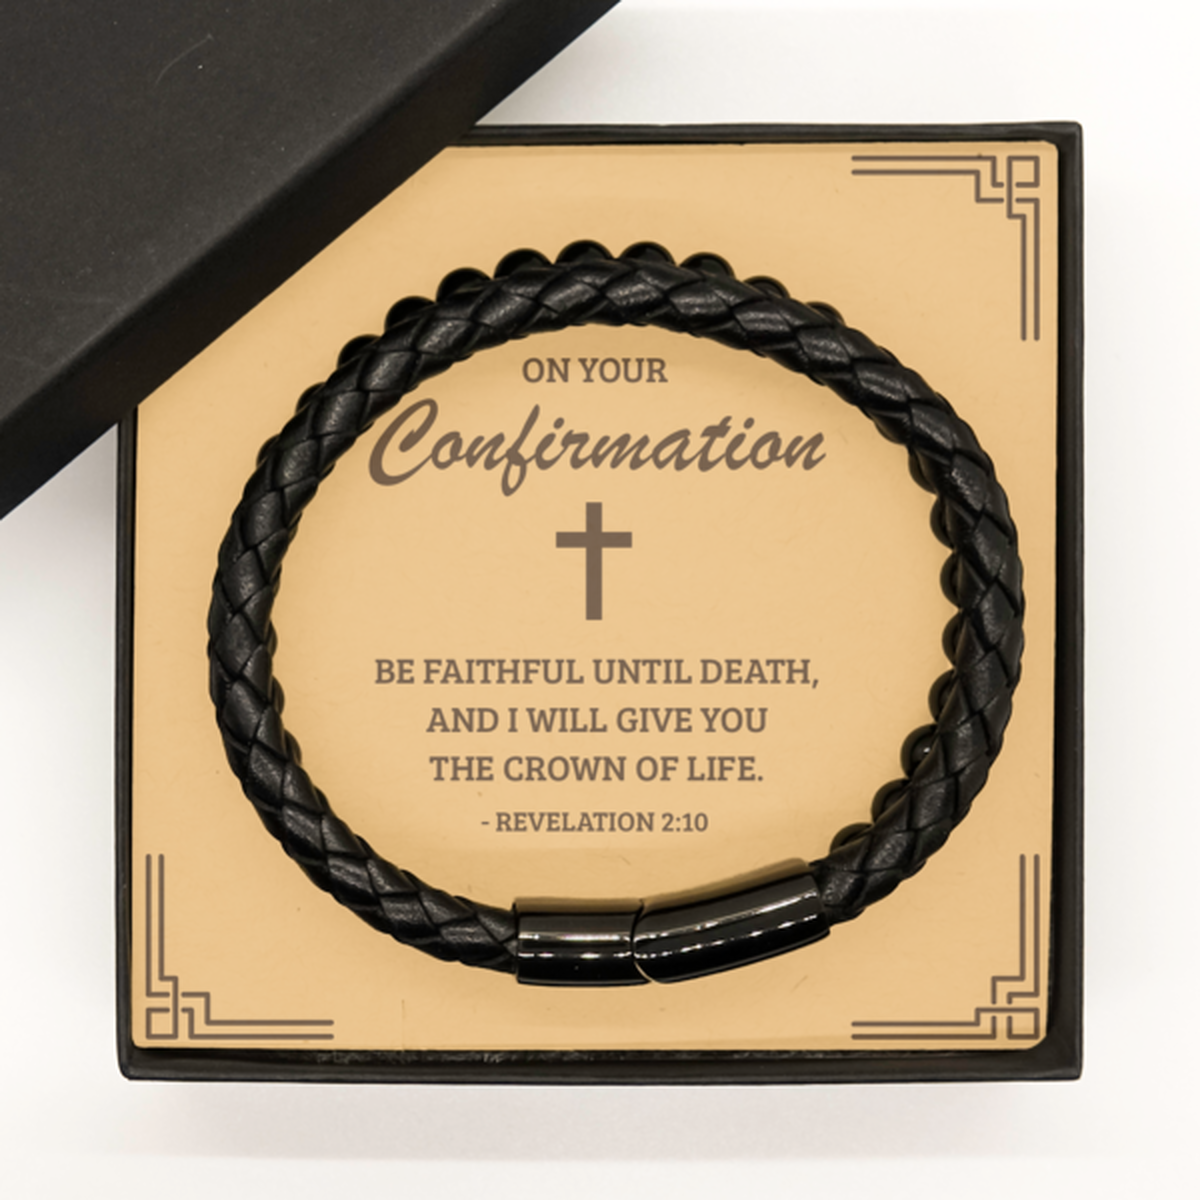 Confirmation Gifts for Teenage Boys, Be faithful until death, Stone Leather Bracelet with Bible Verse Message Card, Religious Catholic Bracelet for Son, Grandson, Dad, Godfather